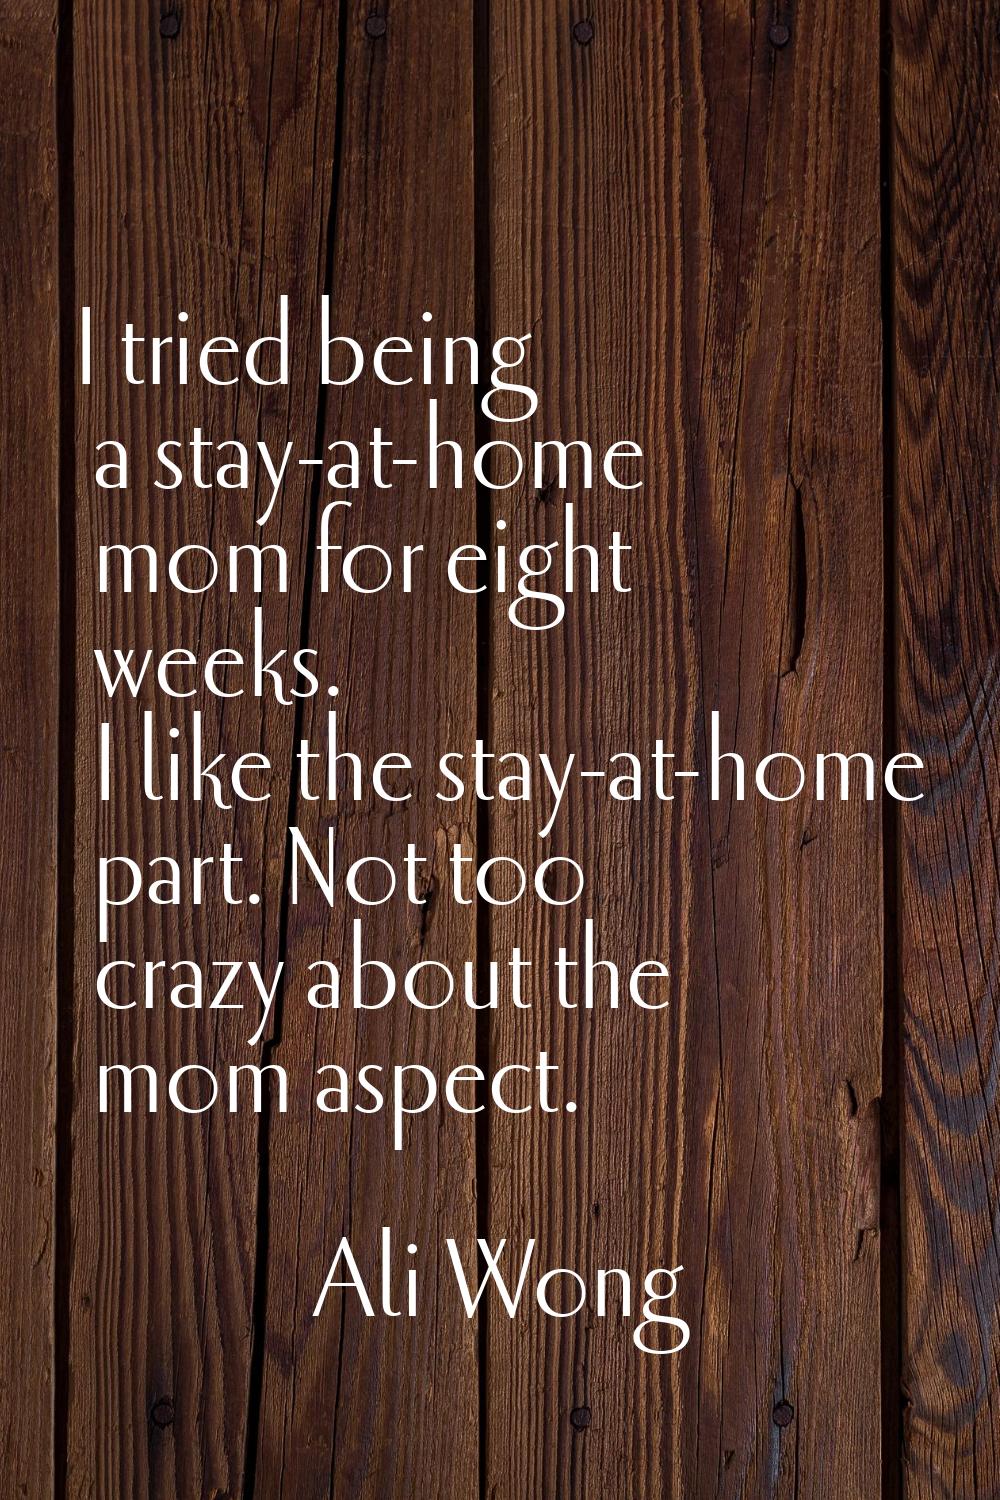 I tried being a stay-at-home mom for eight weeks. I like the stay-at-home part. Not too crazy about